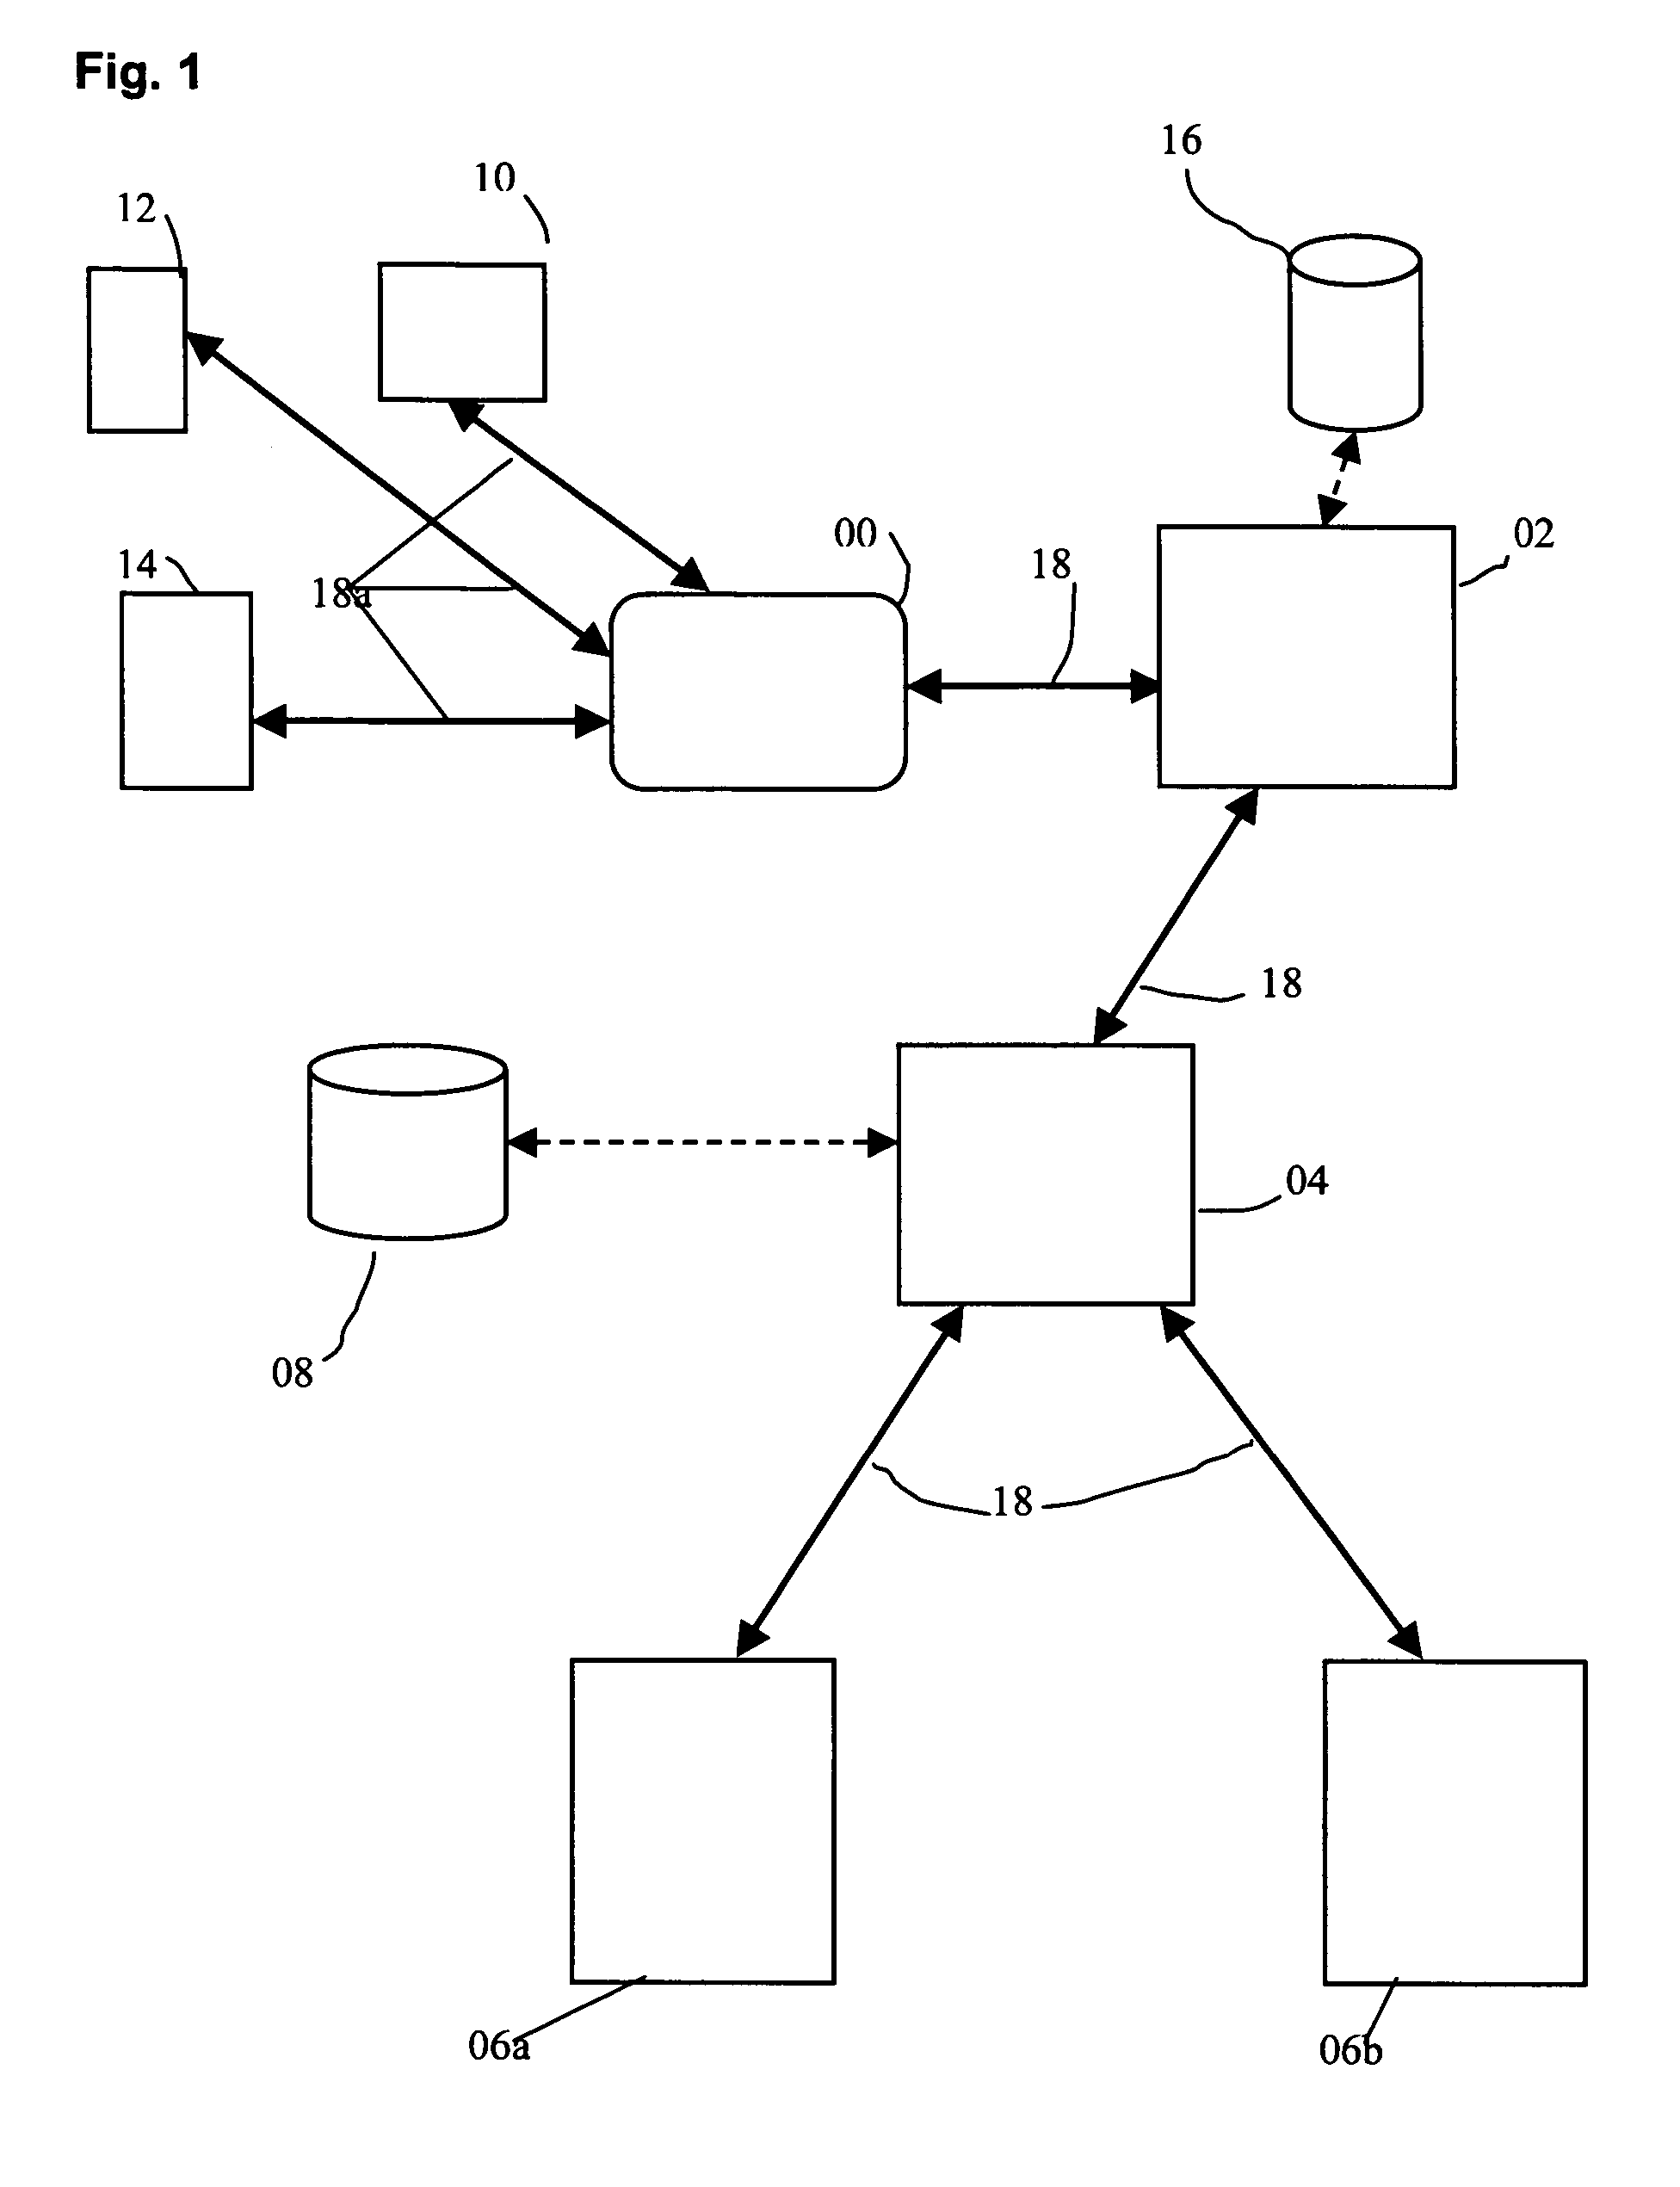 System and method for integrated data transfer, archiving and purging of semiconductor wafer data